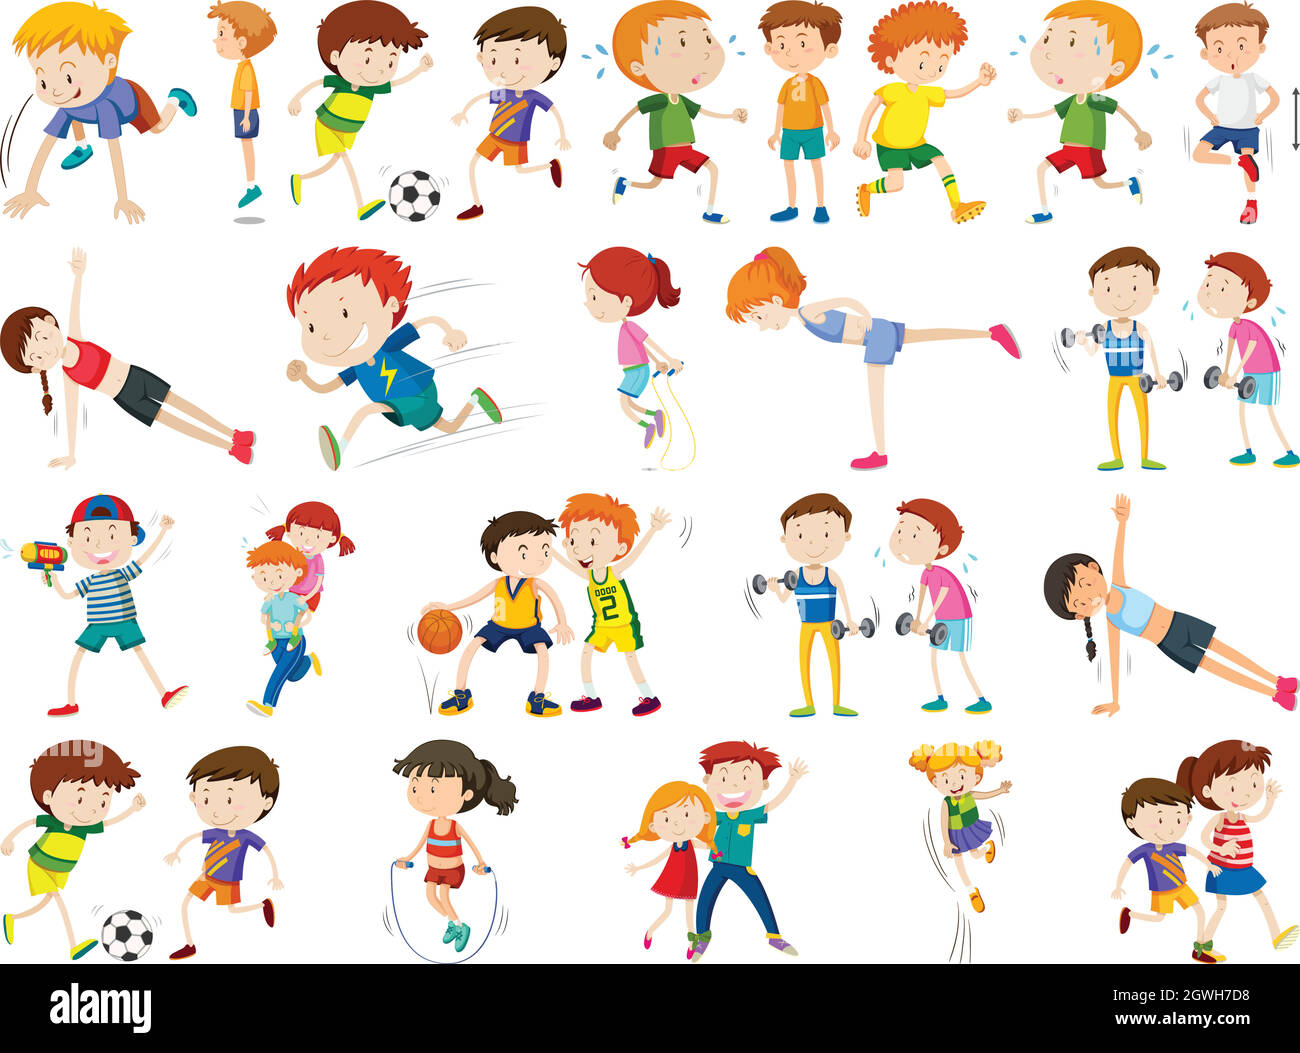 Kids exercising and being active in set Stock Vector